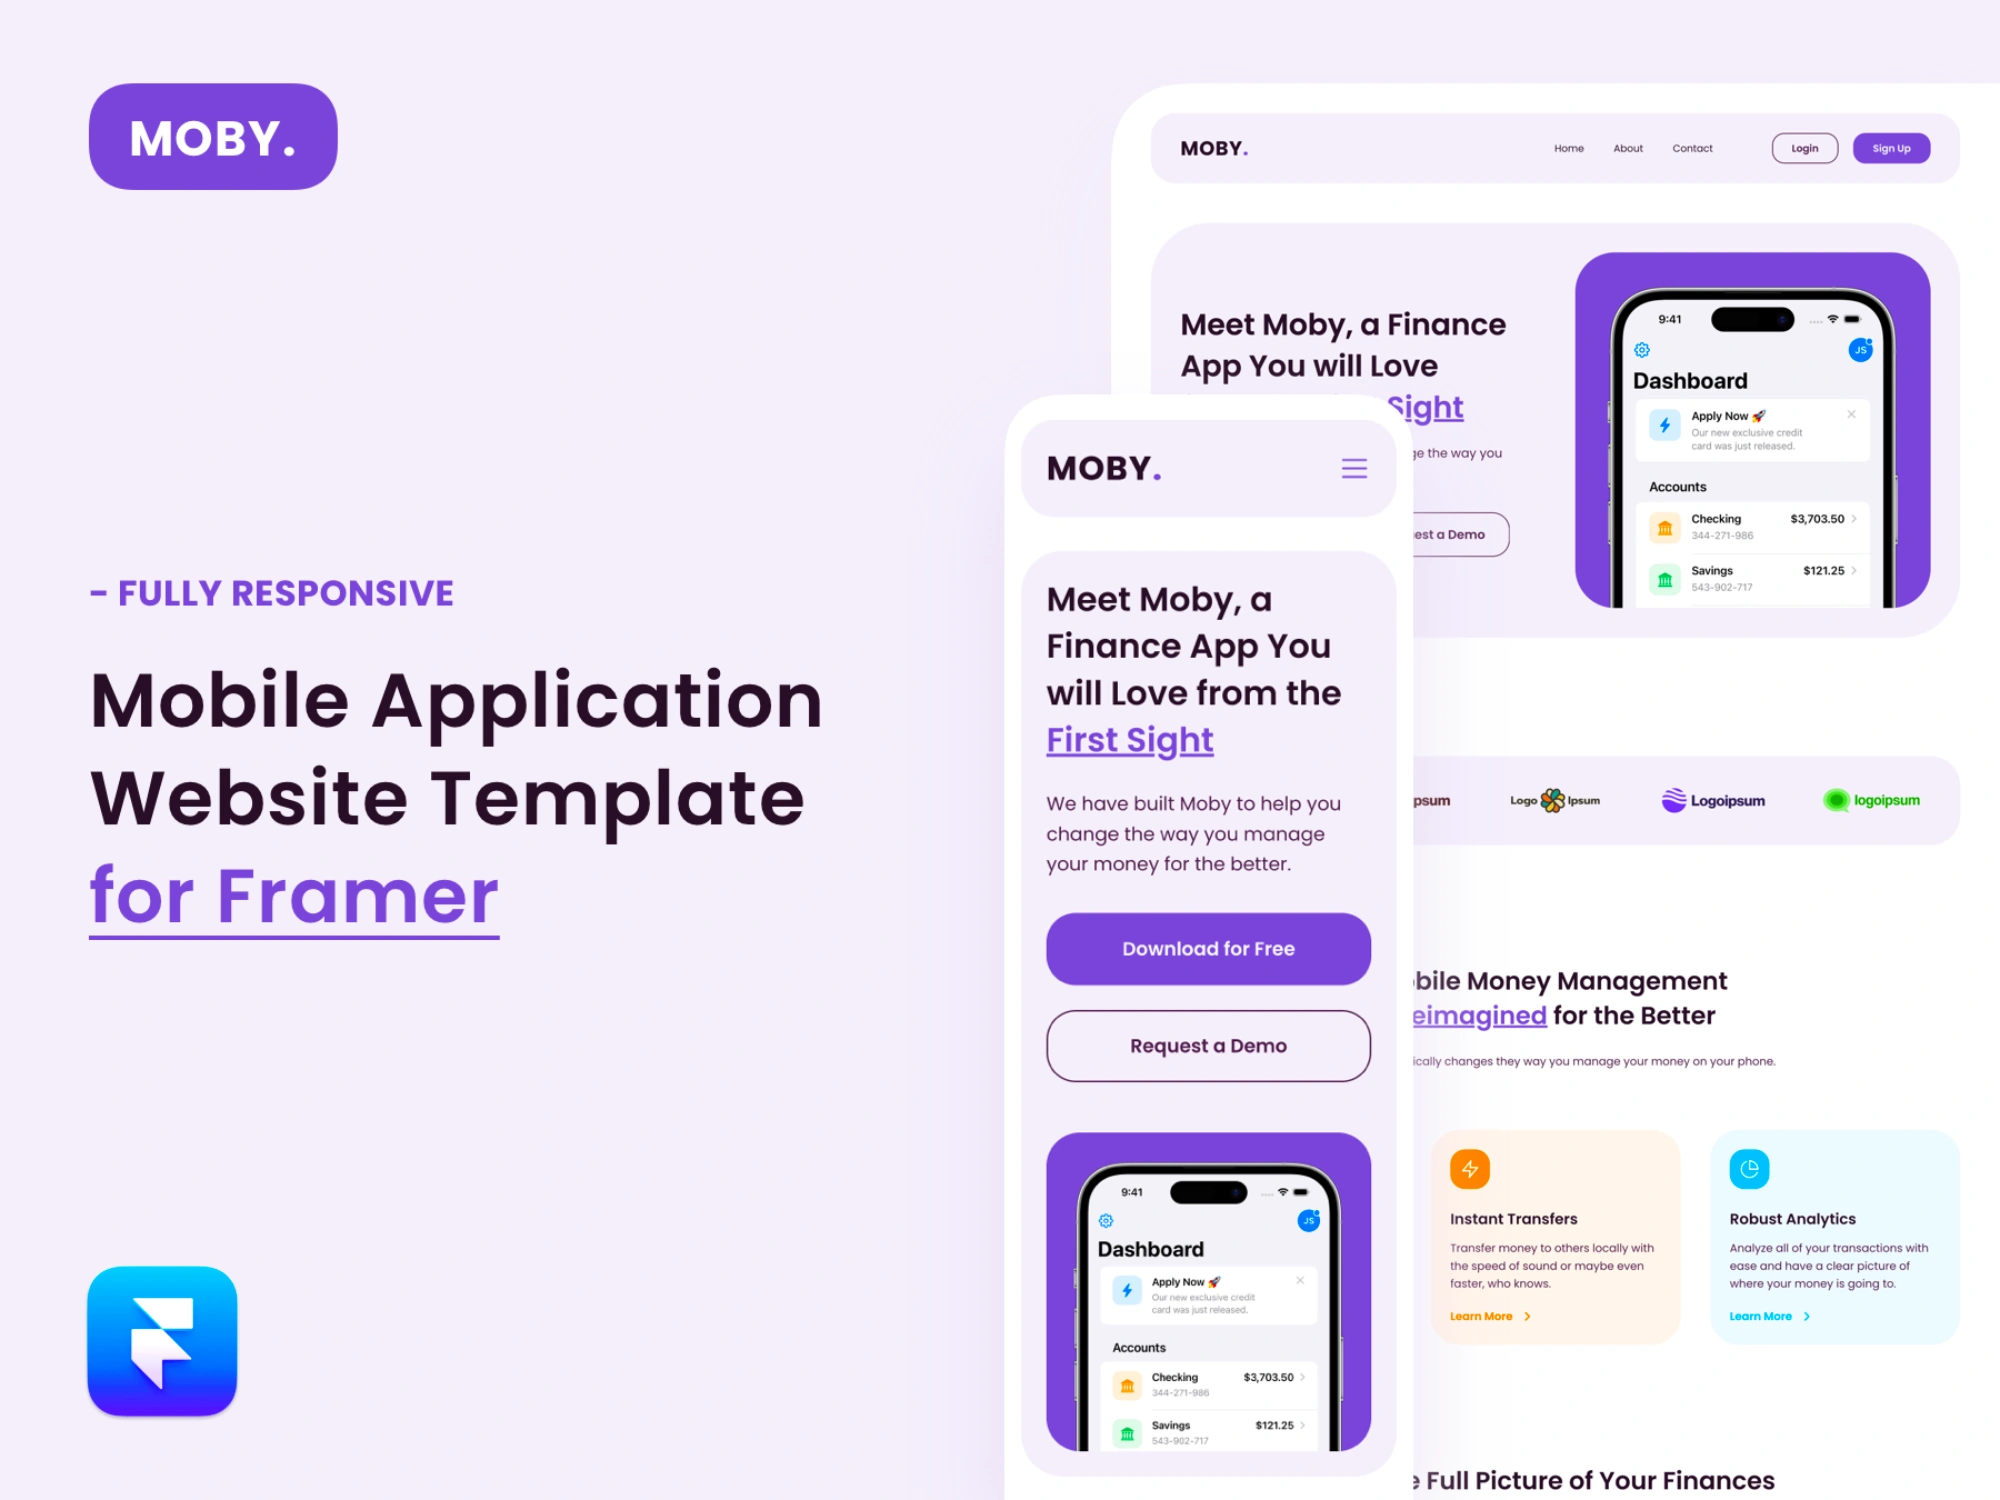 [VIP] Moby: Mobile Application Website Template